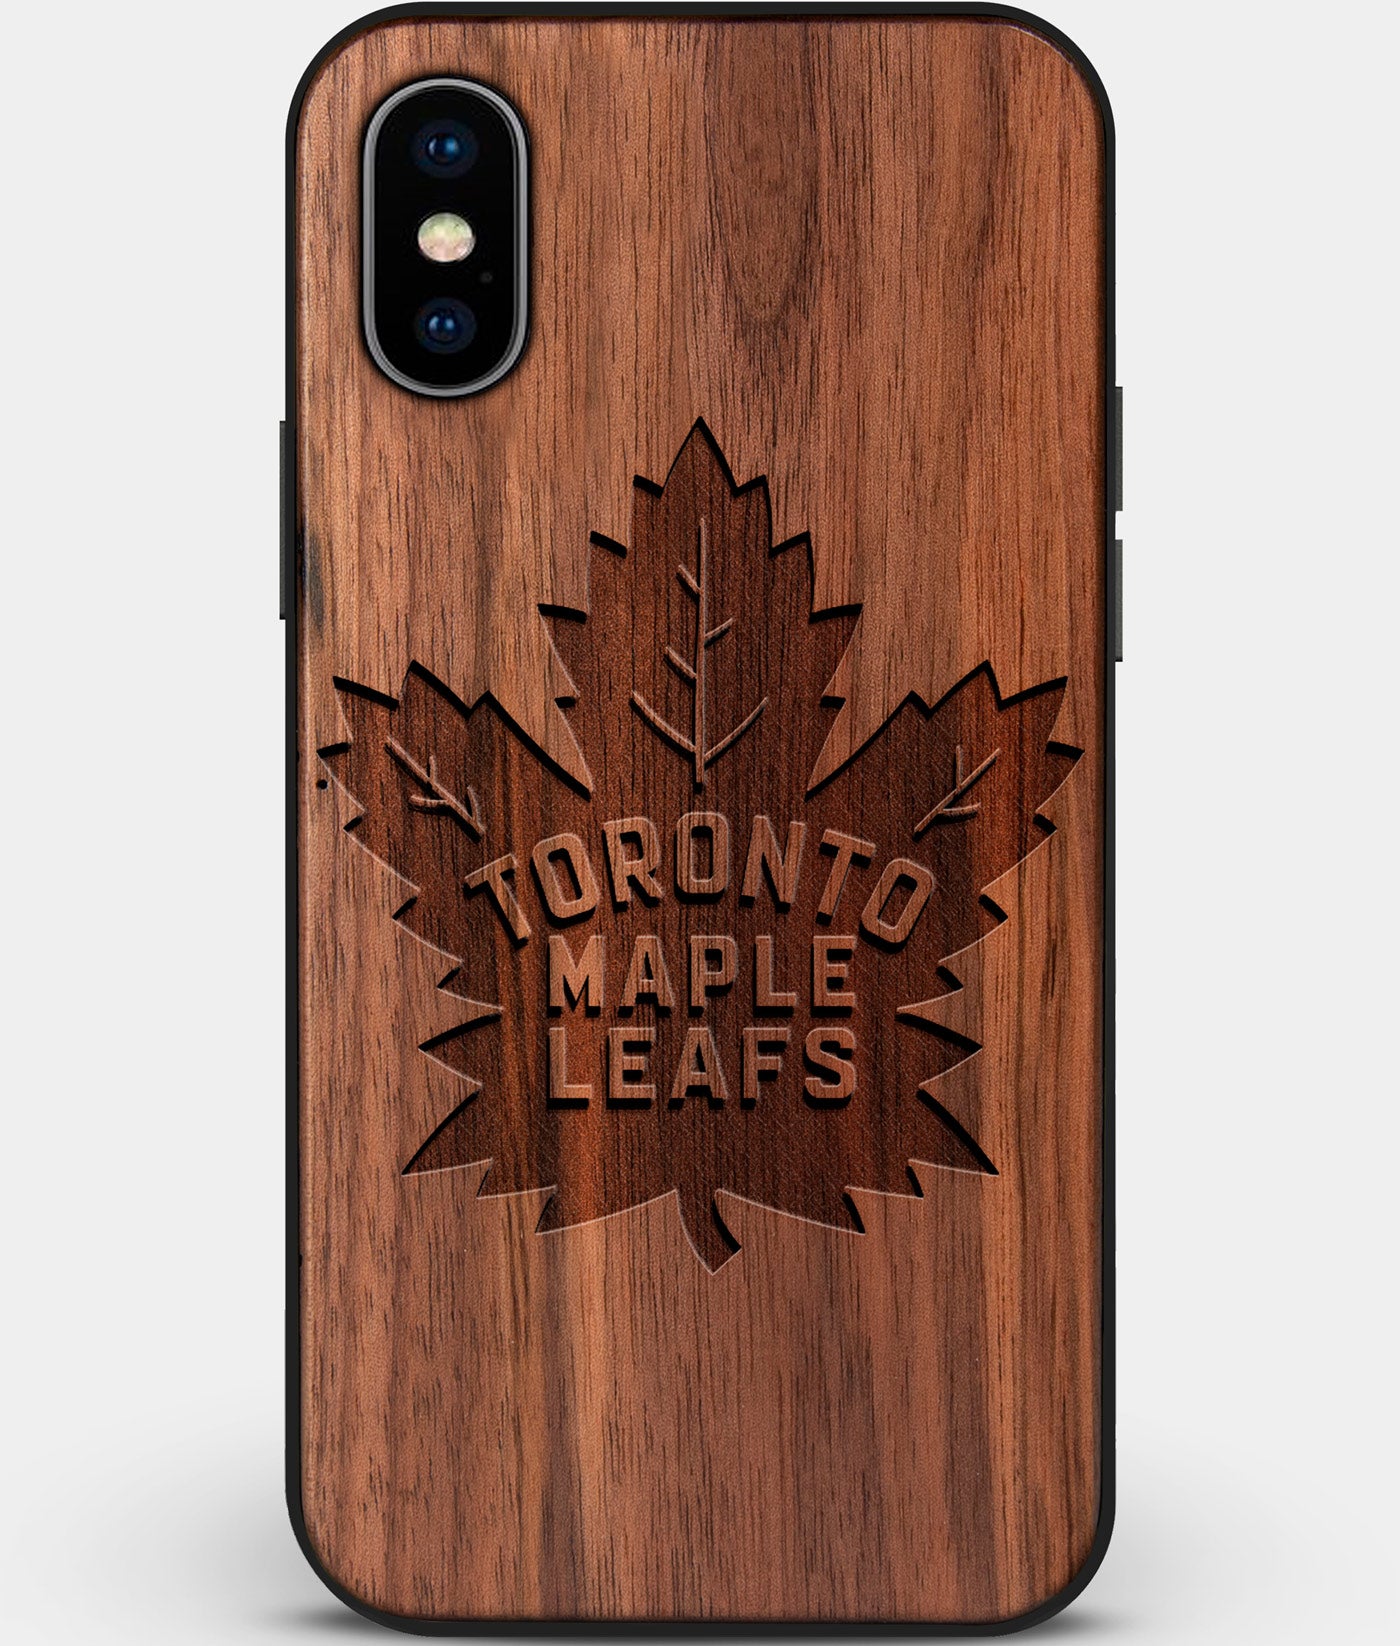 Custom Carved Wood Toronto Maple Leafs iPhone XS Max Case | Personalized Walnut Wood Toronto Maple Leafs Cover, Birthday Gift, Gifts For Him, Monogrammed Gift For Fan | by Engraved In Nature